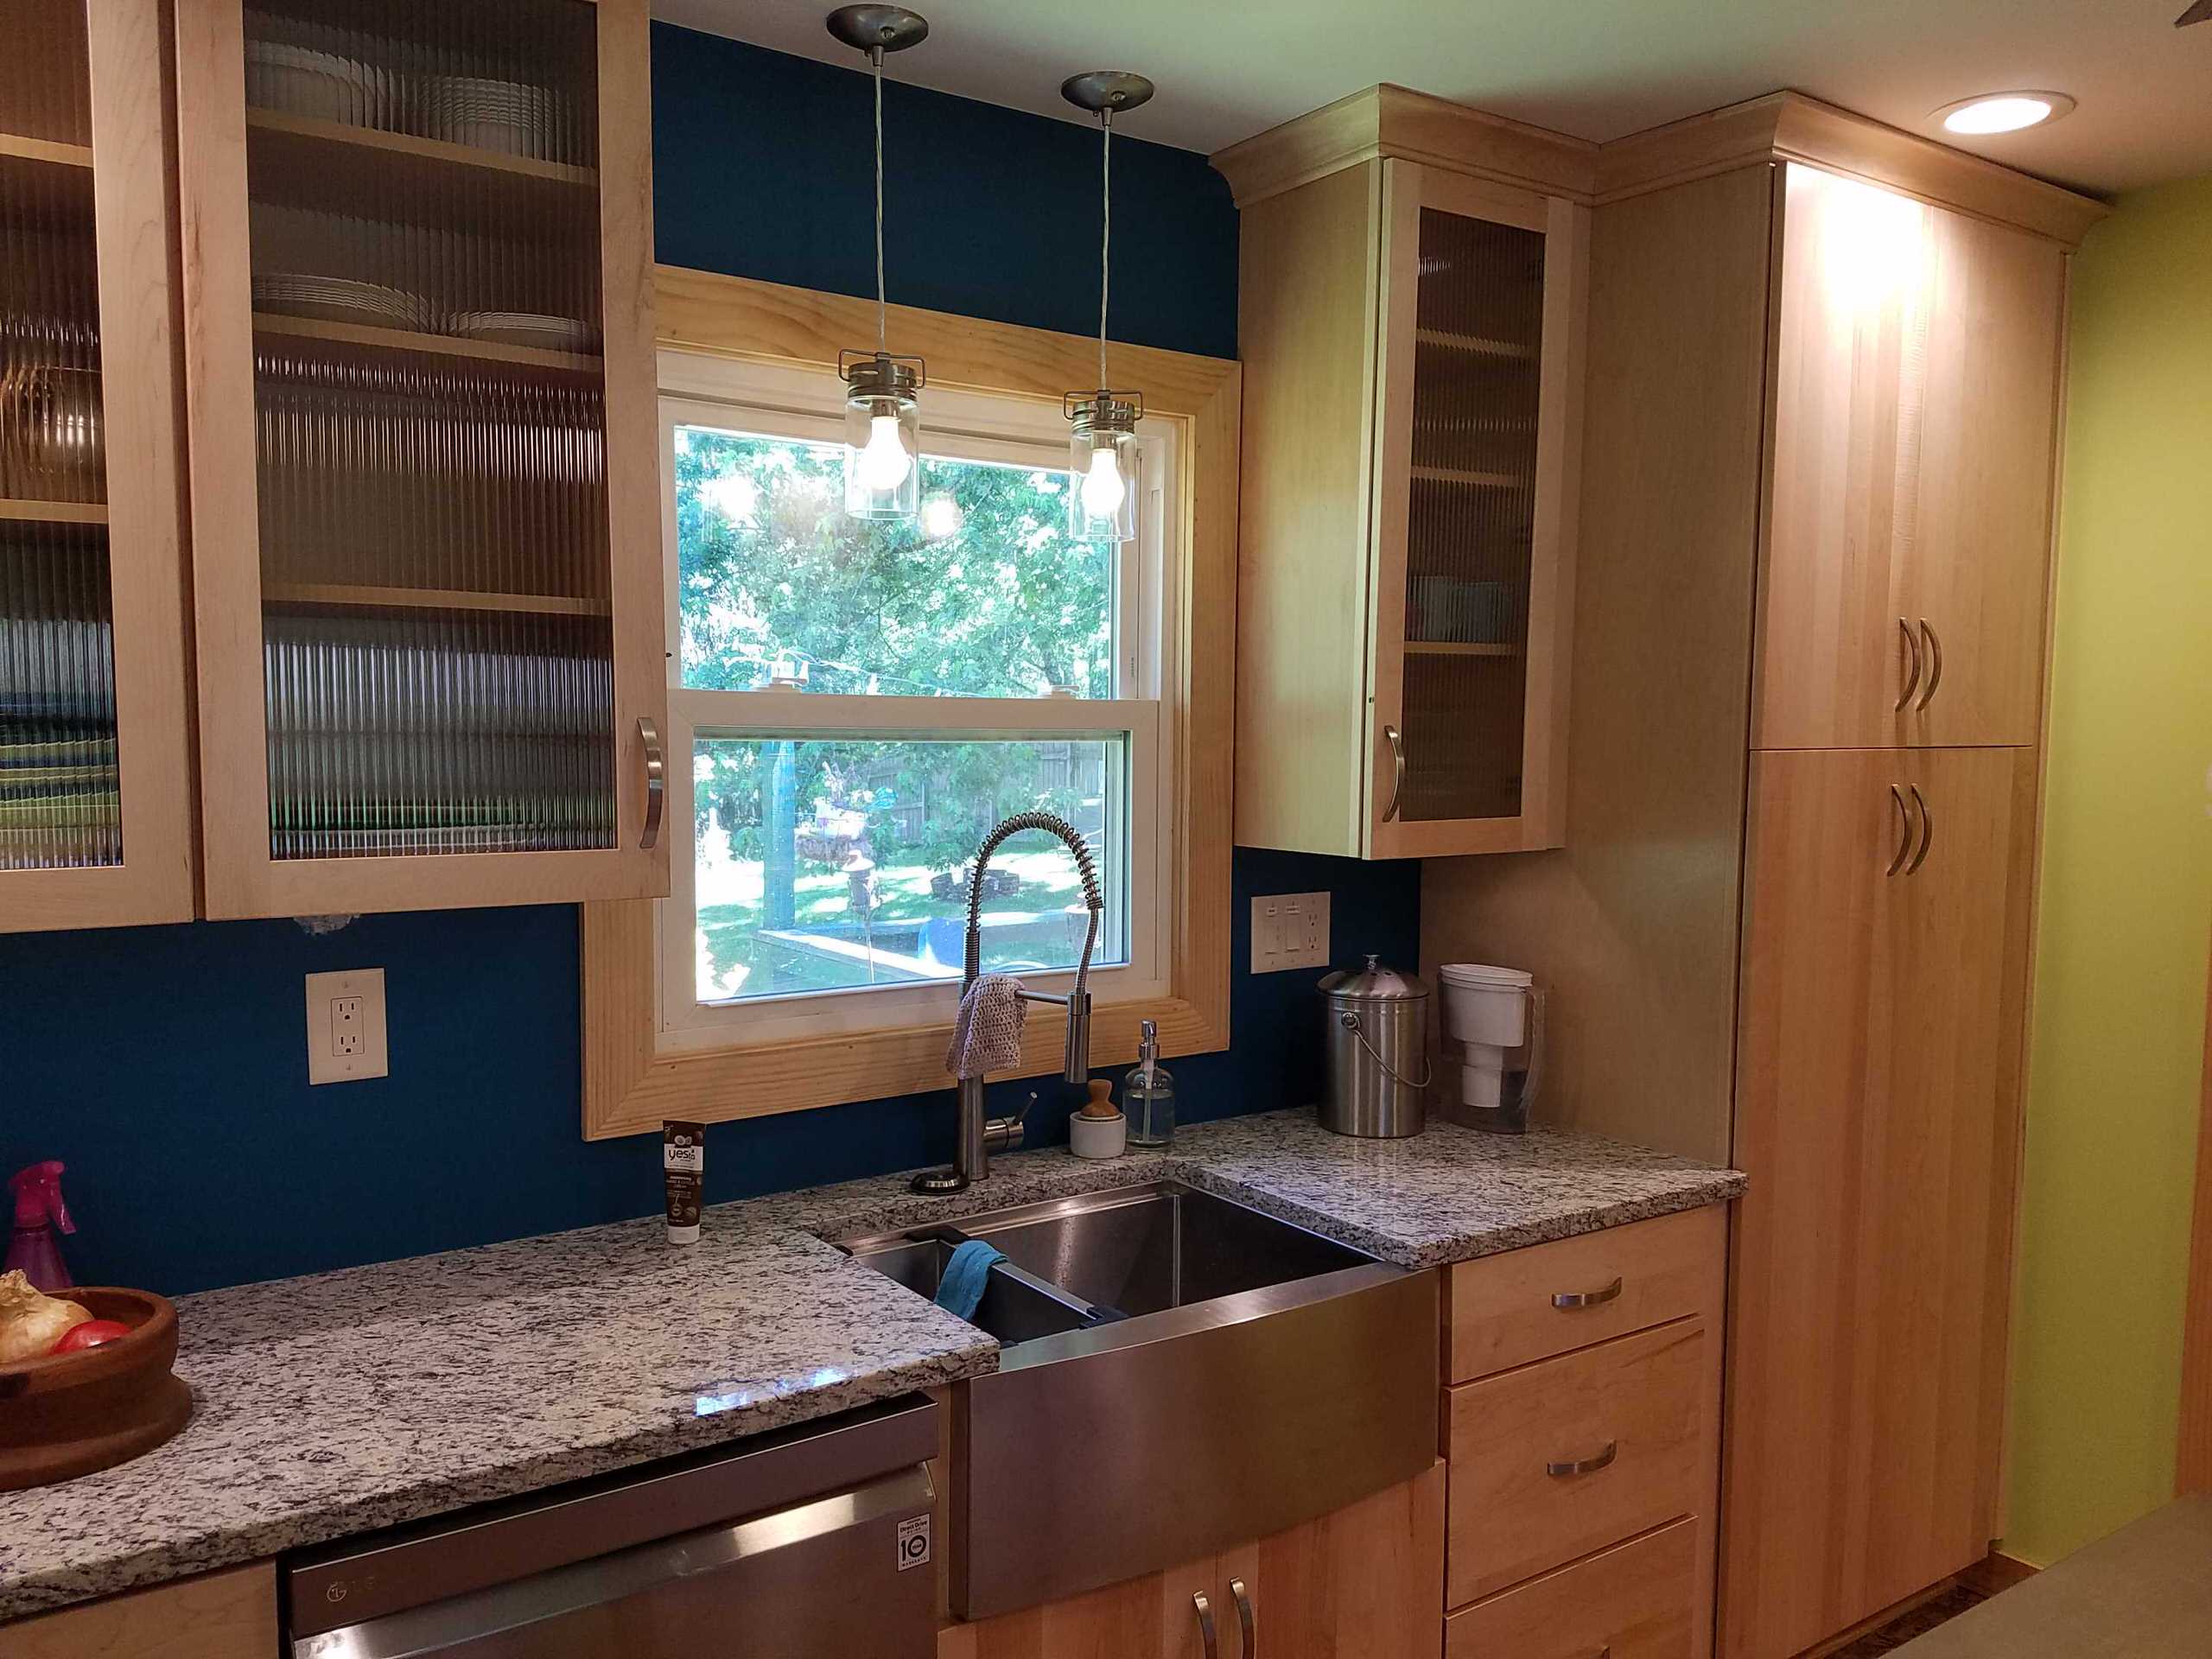 Kitchen & Office/Library Remodel